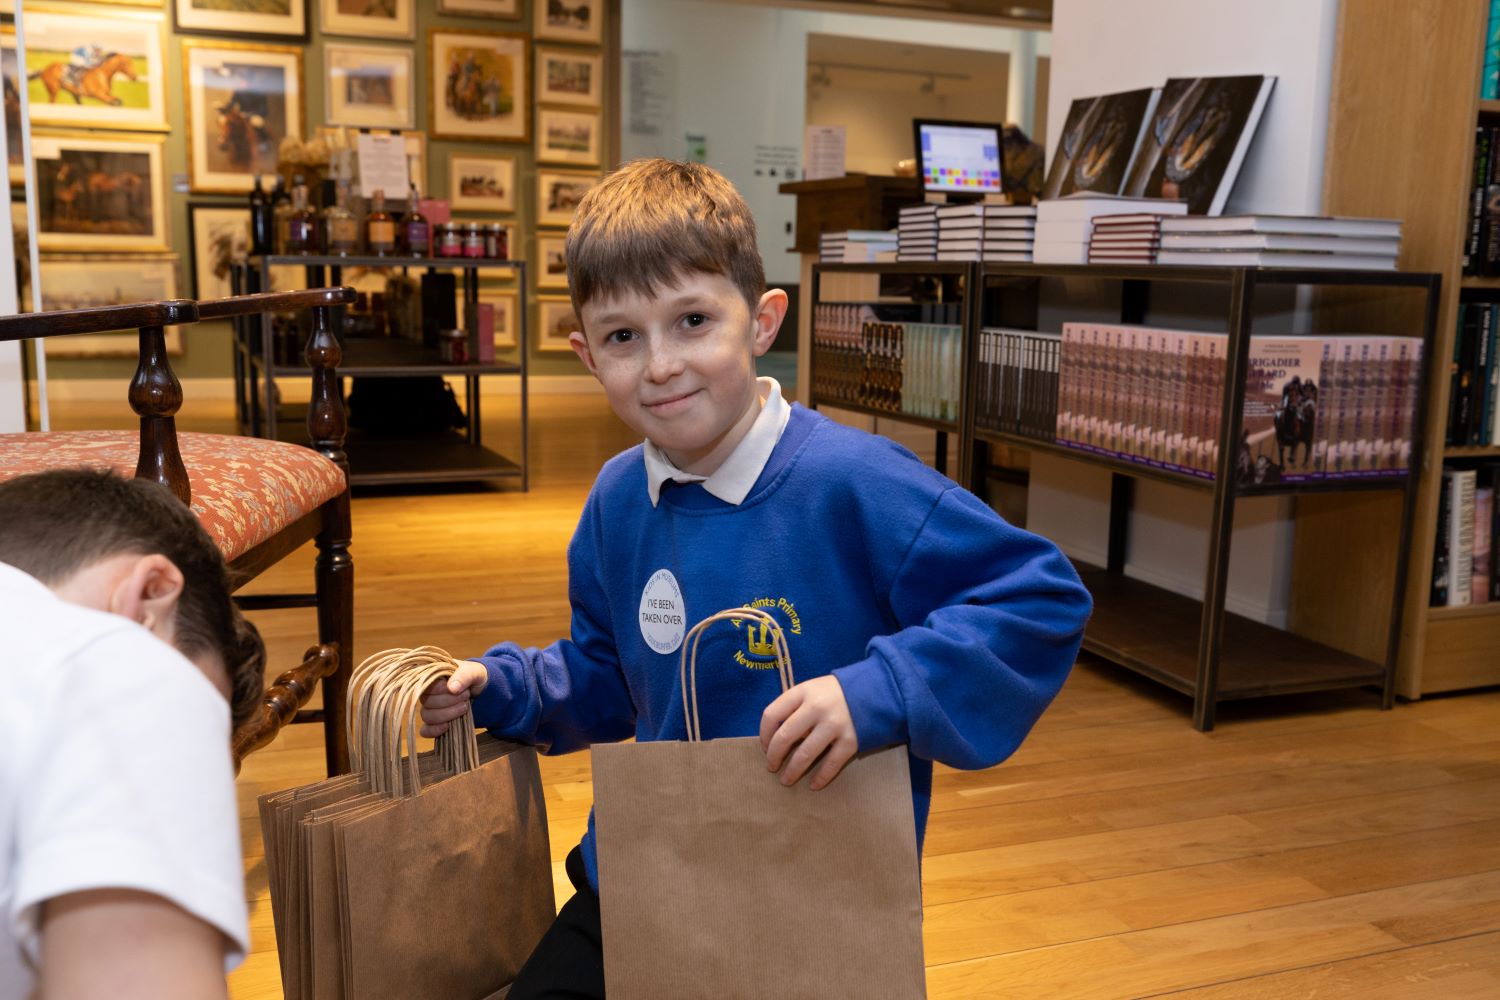 A young boy wearing school uniform and a Takeover Day sticker sorts out paper bags in the sop at the National Horseracing Museum.